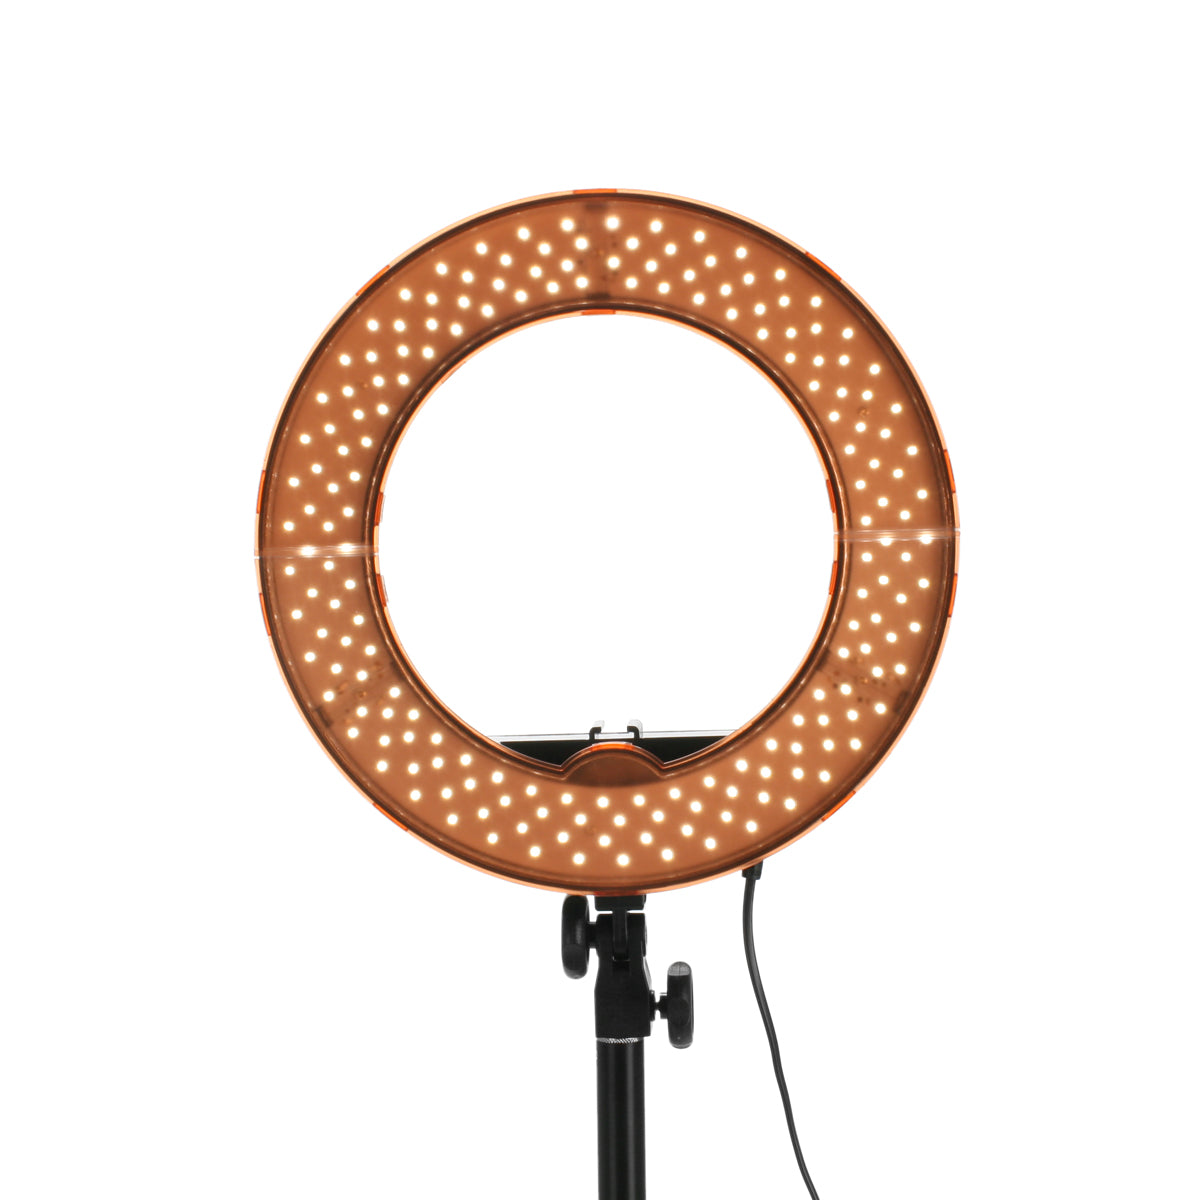 Smith-Victor LED Ring Light (13.5”)